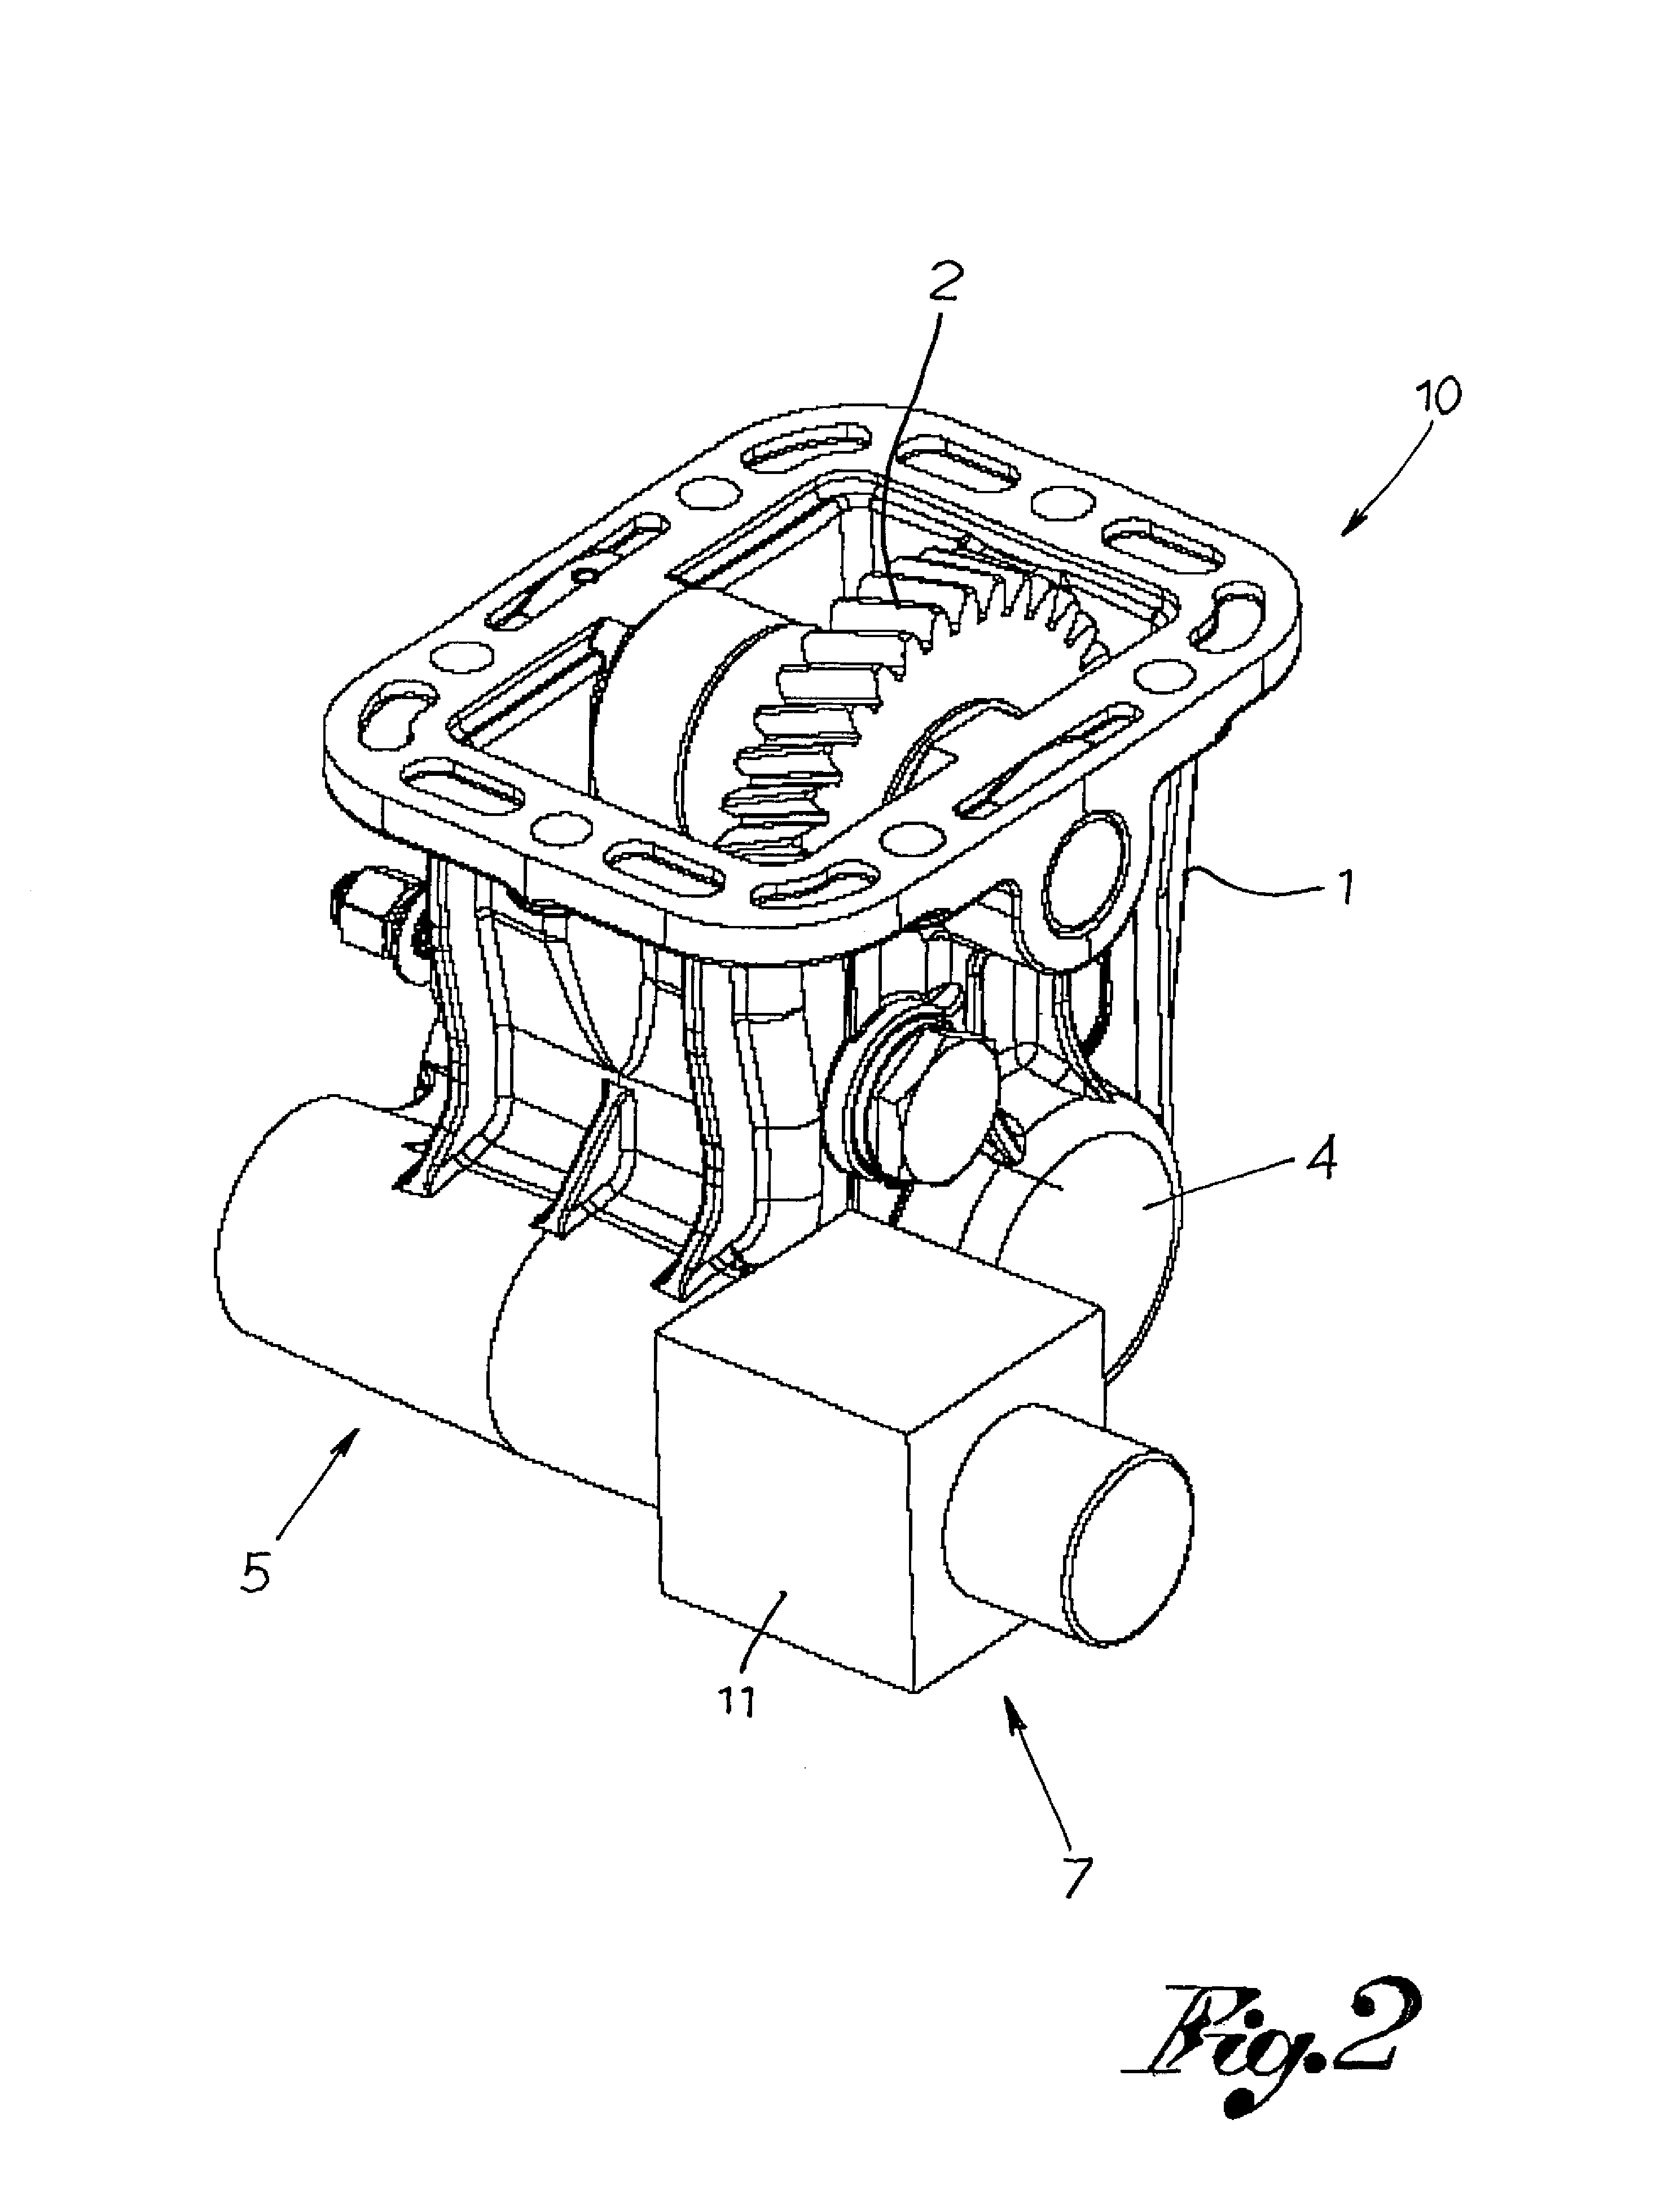 Solenoid device for engaging power takeoffs